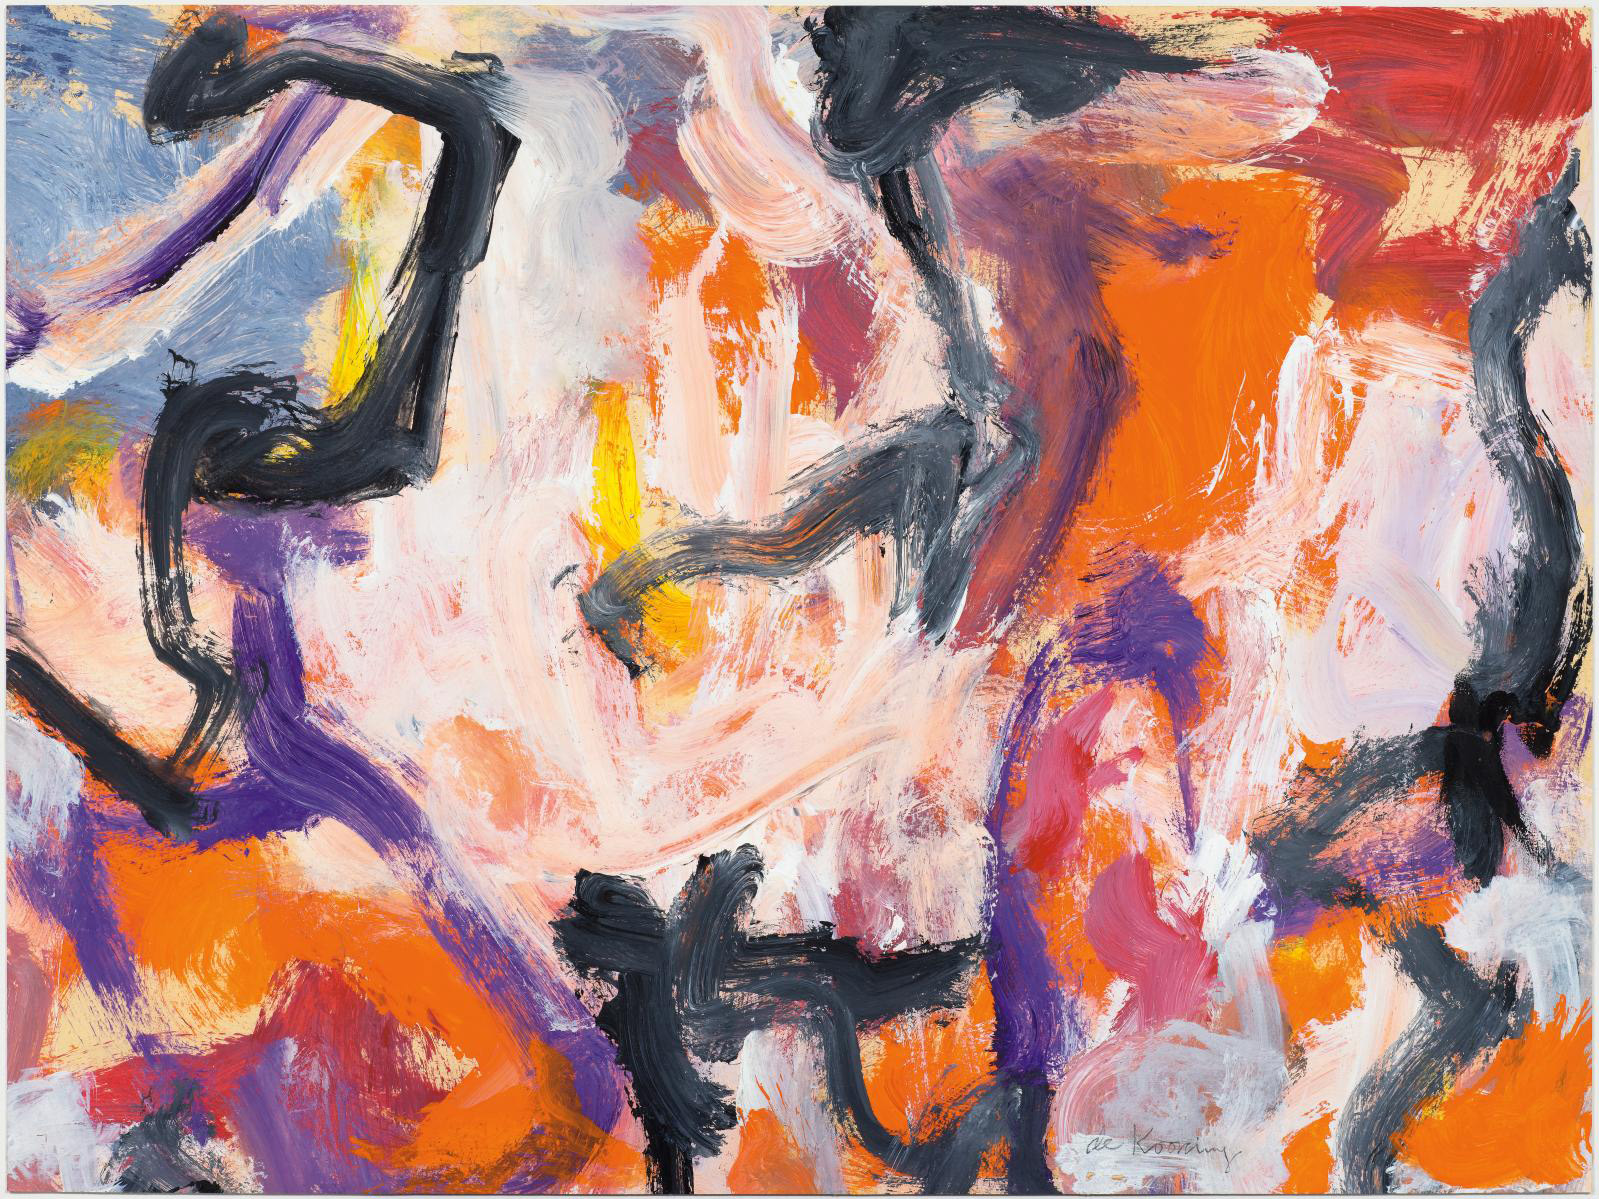 Willem de Kooning, the Rejection of Styles